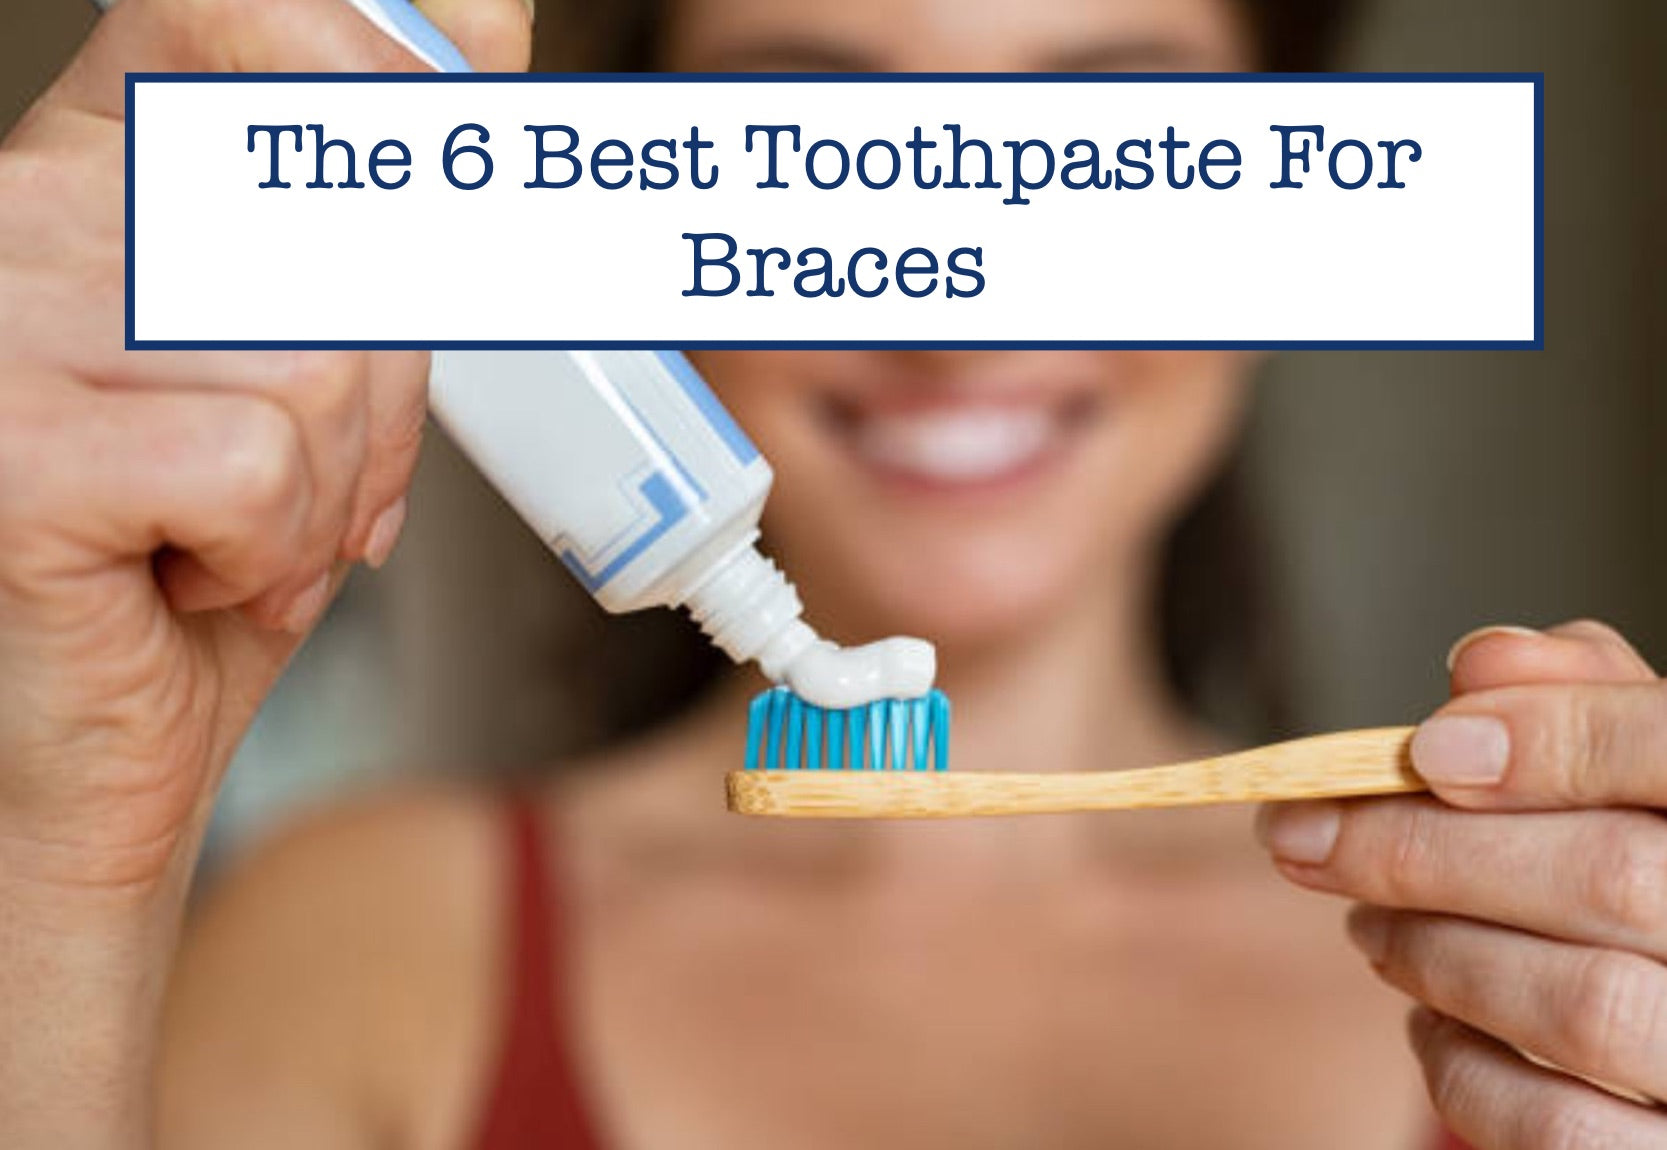 The 6 Best Toothpaste For Braces